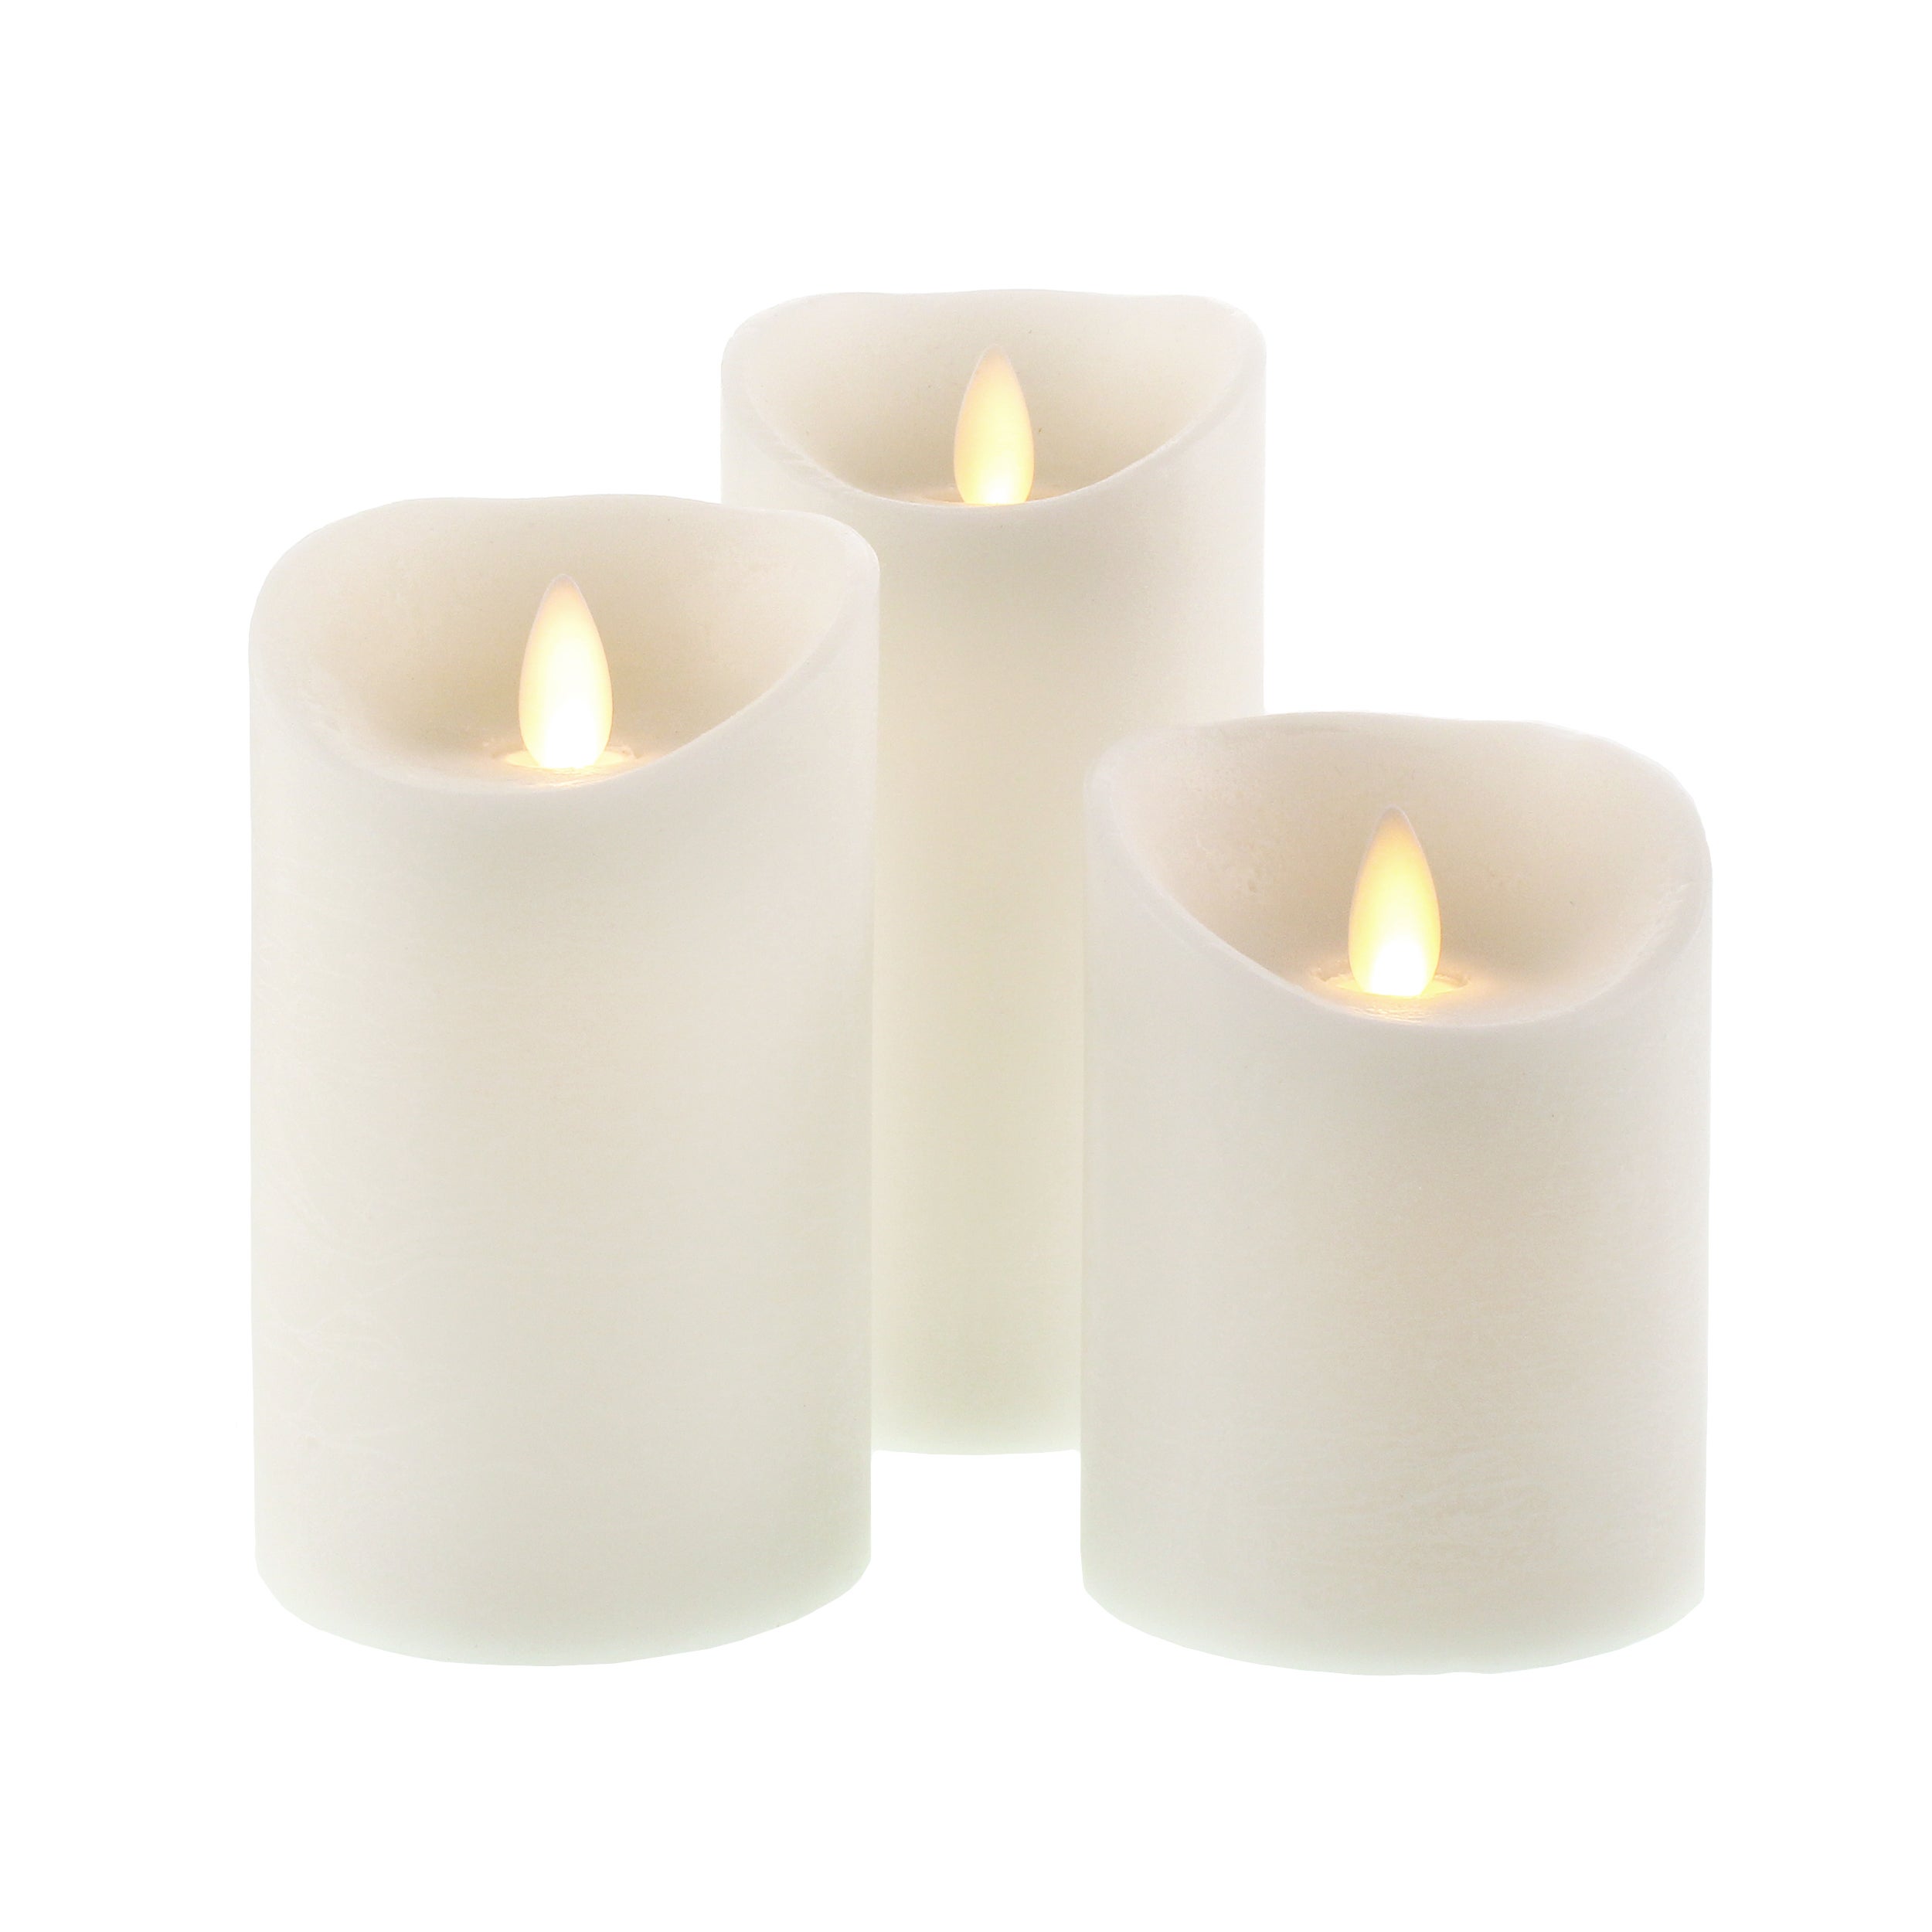 Set of 3 Cosy Cashmere LED Pillar Candles